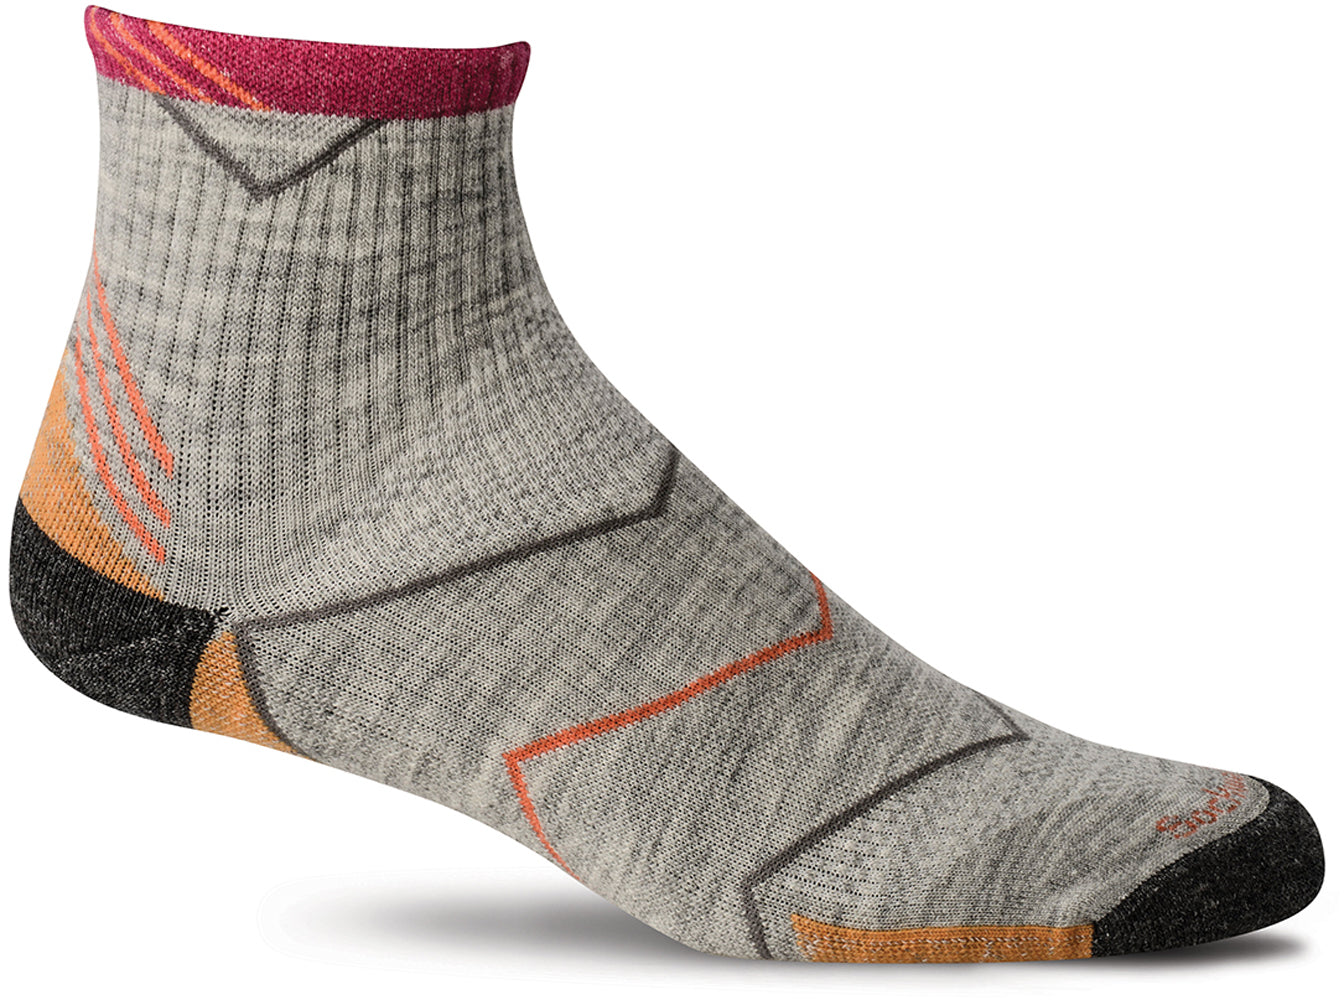 Sockwell Women's Incline Quarter Sock in Grey color from the side